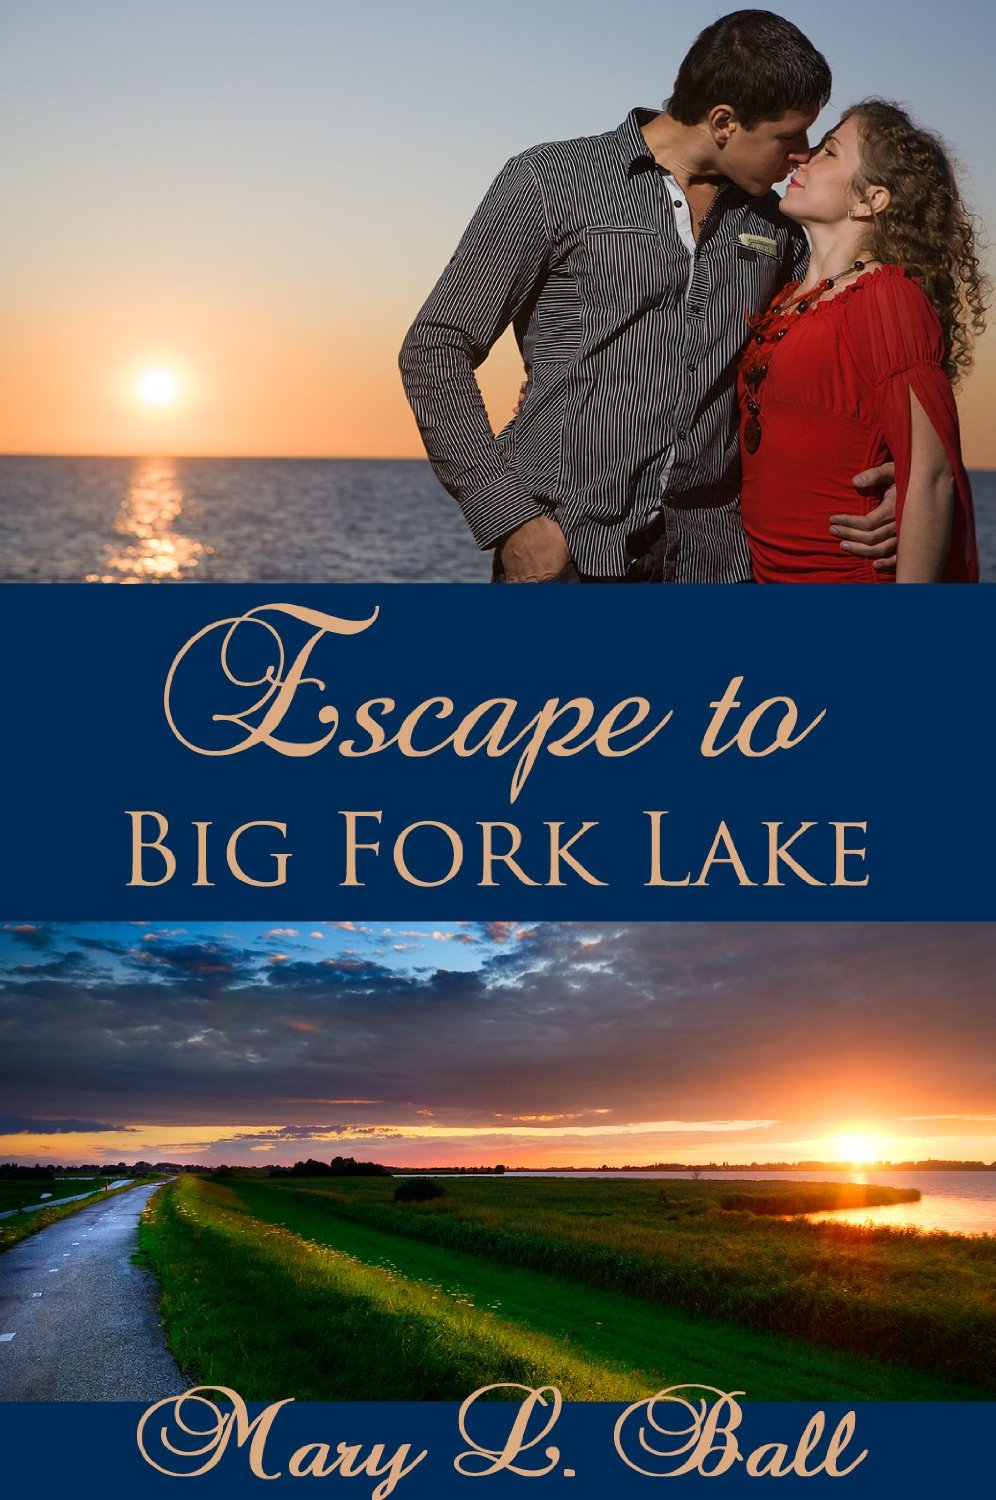 Video of the Week: Escape to Big Fork Lake by Mary L. Ball